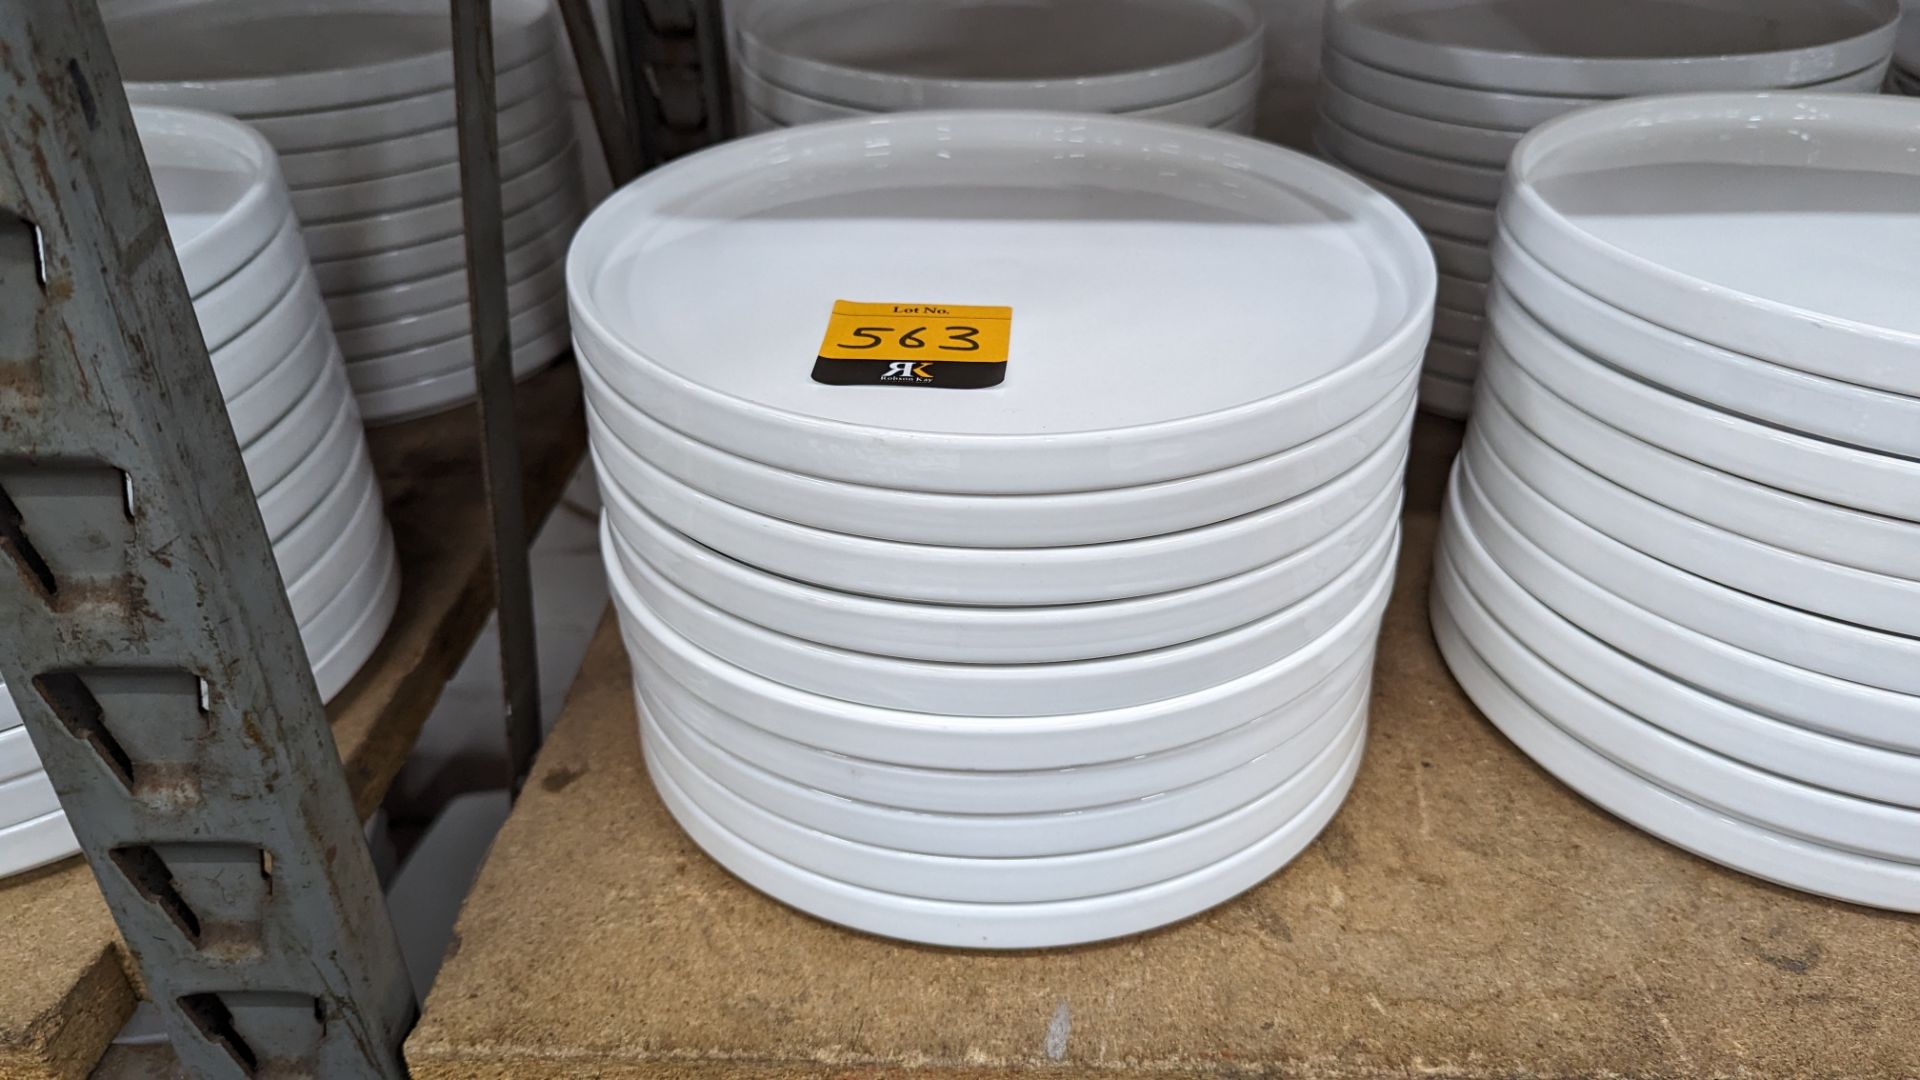 40 off Genware 245mm round flat plates with upright rim to the outer edge - Image 3 of 7